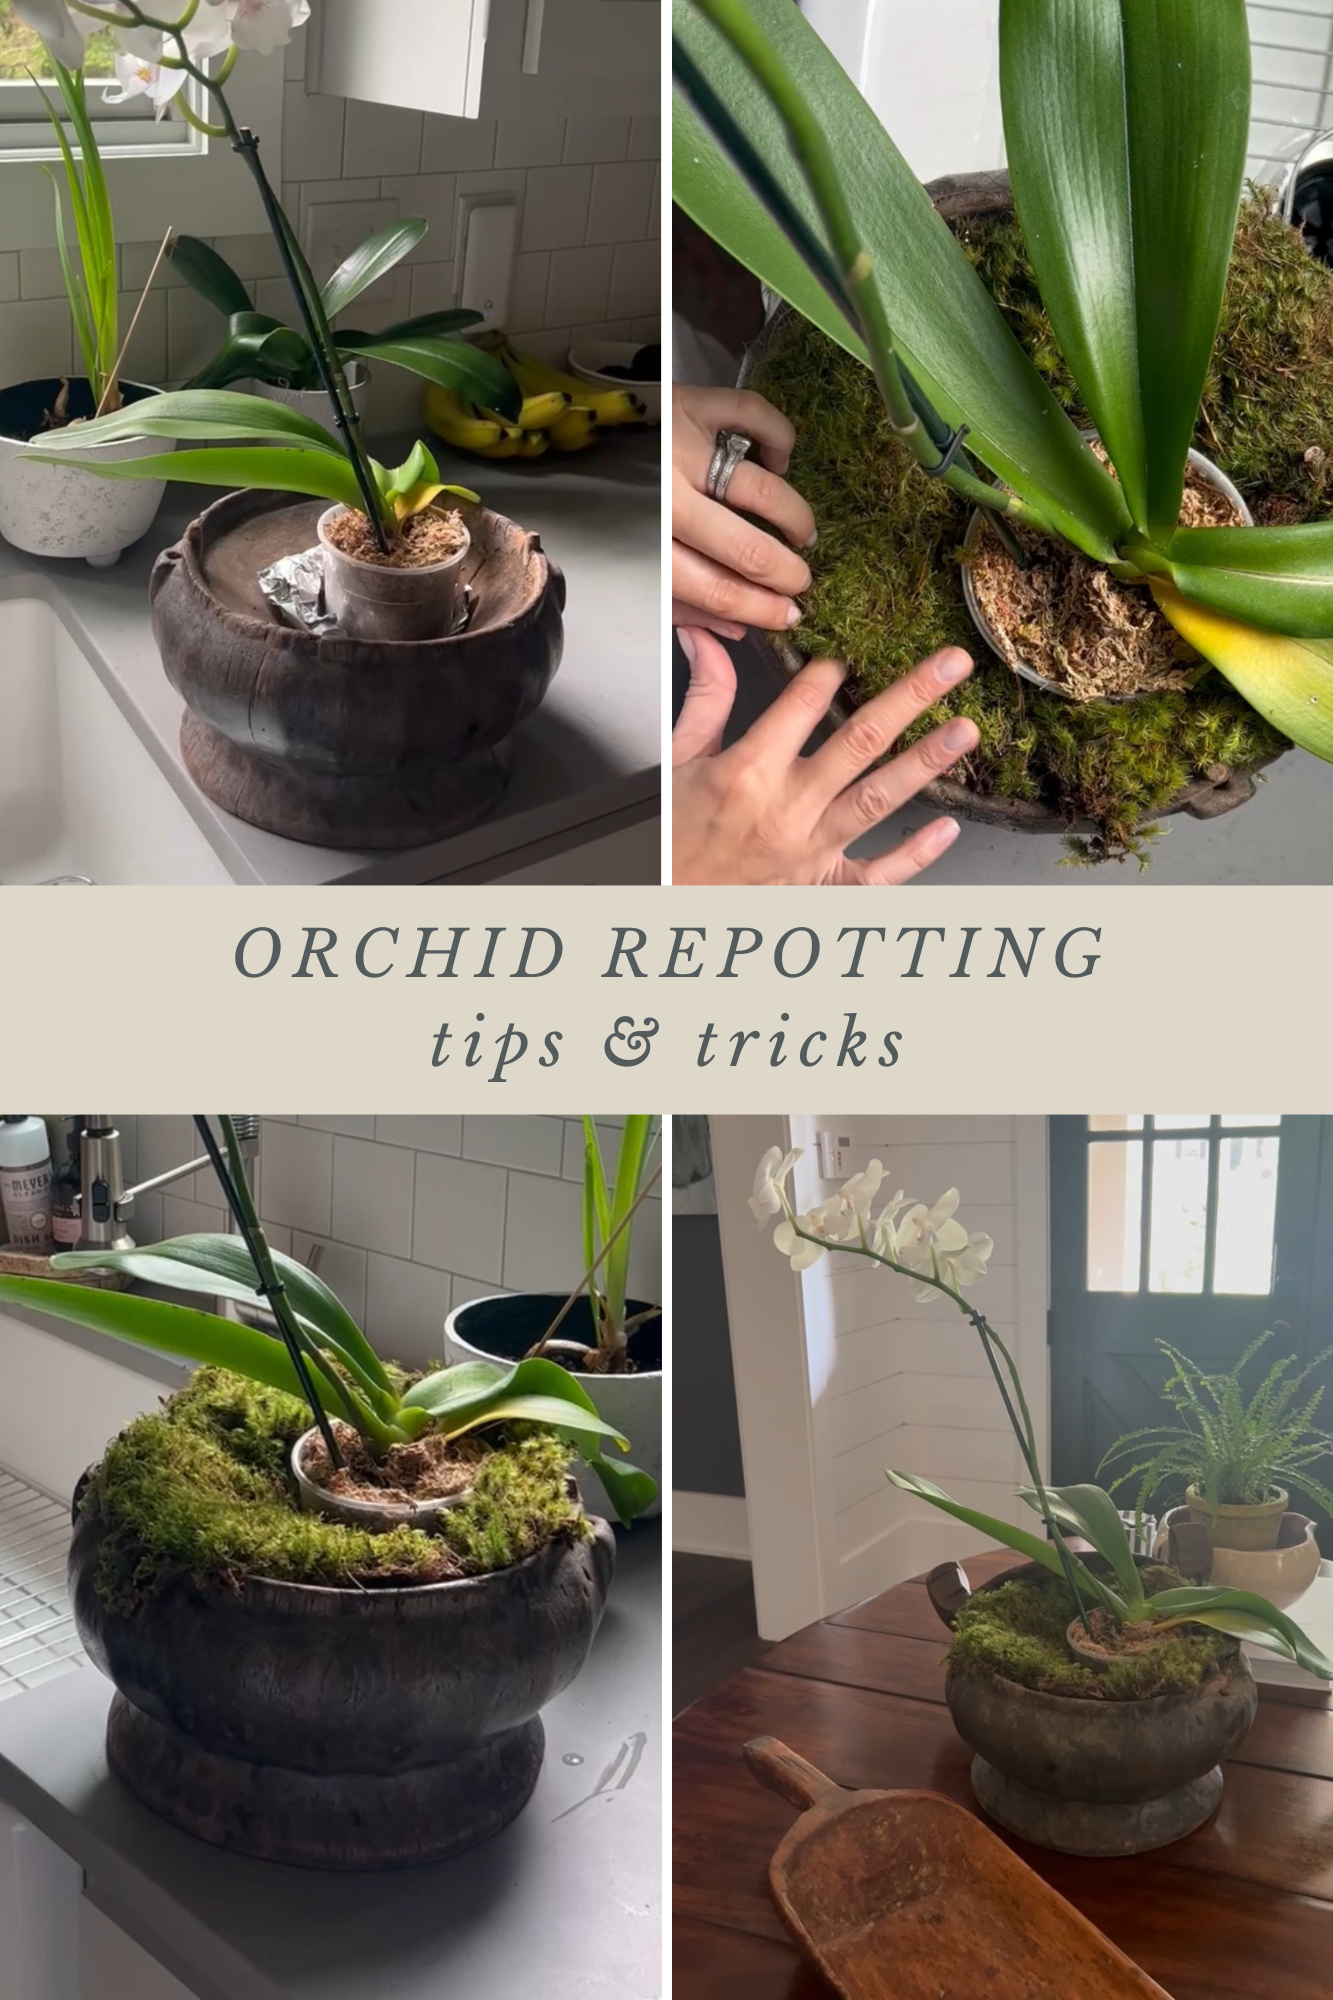 tips and tricks for repotting an orchid